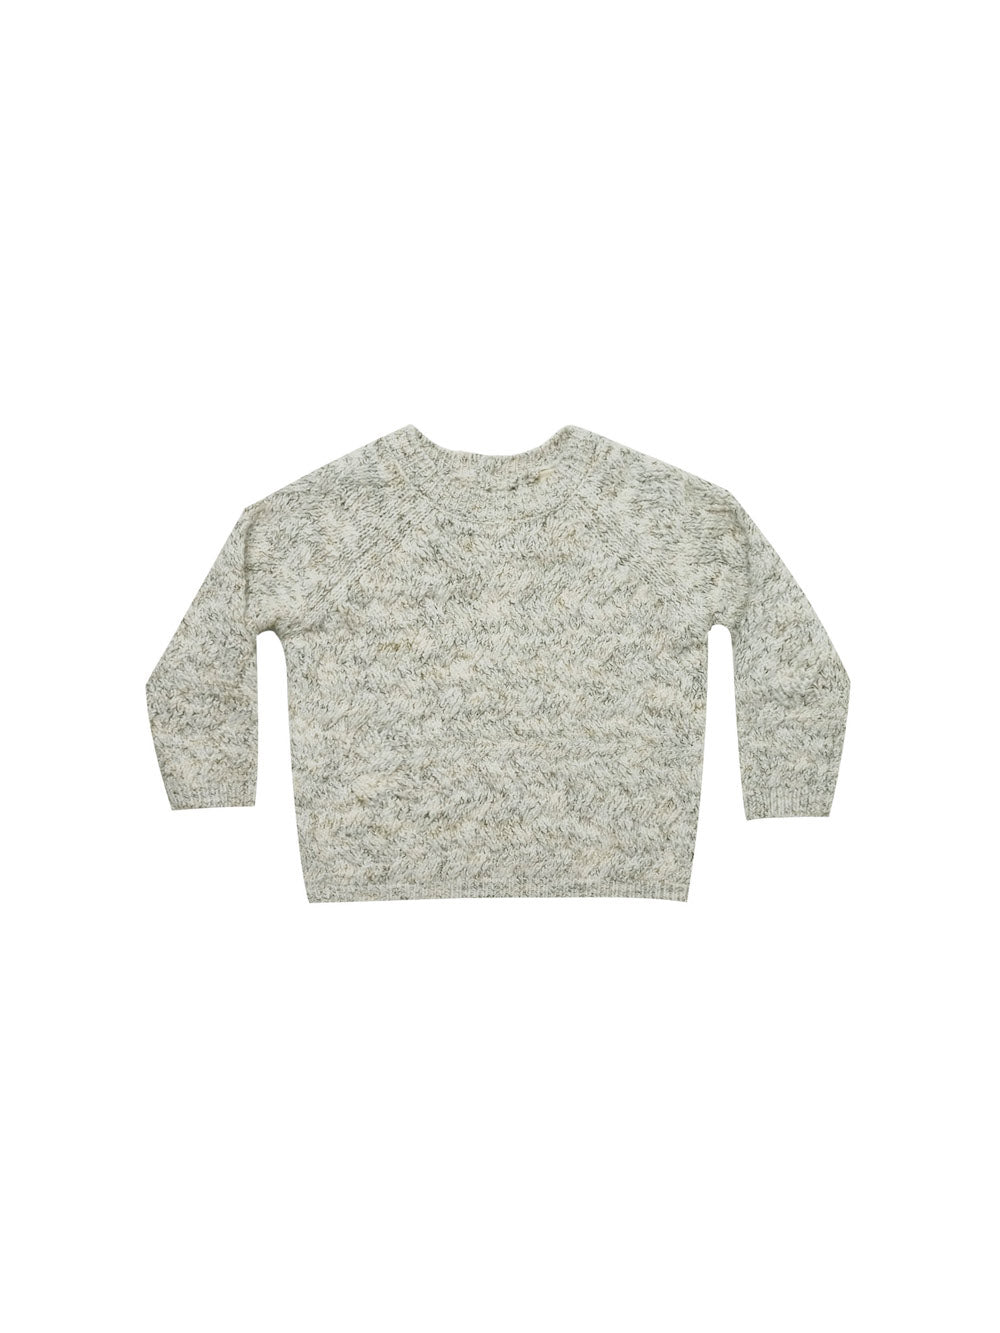 Quincy Mae Cozy Heathered Knit Sweater - Fern